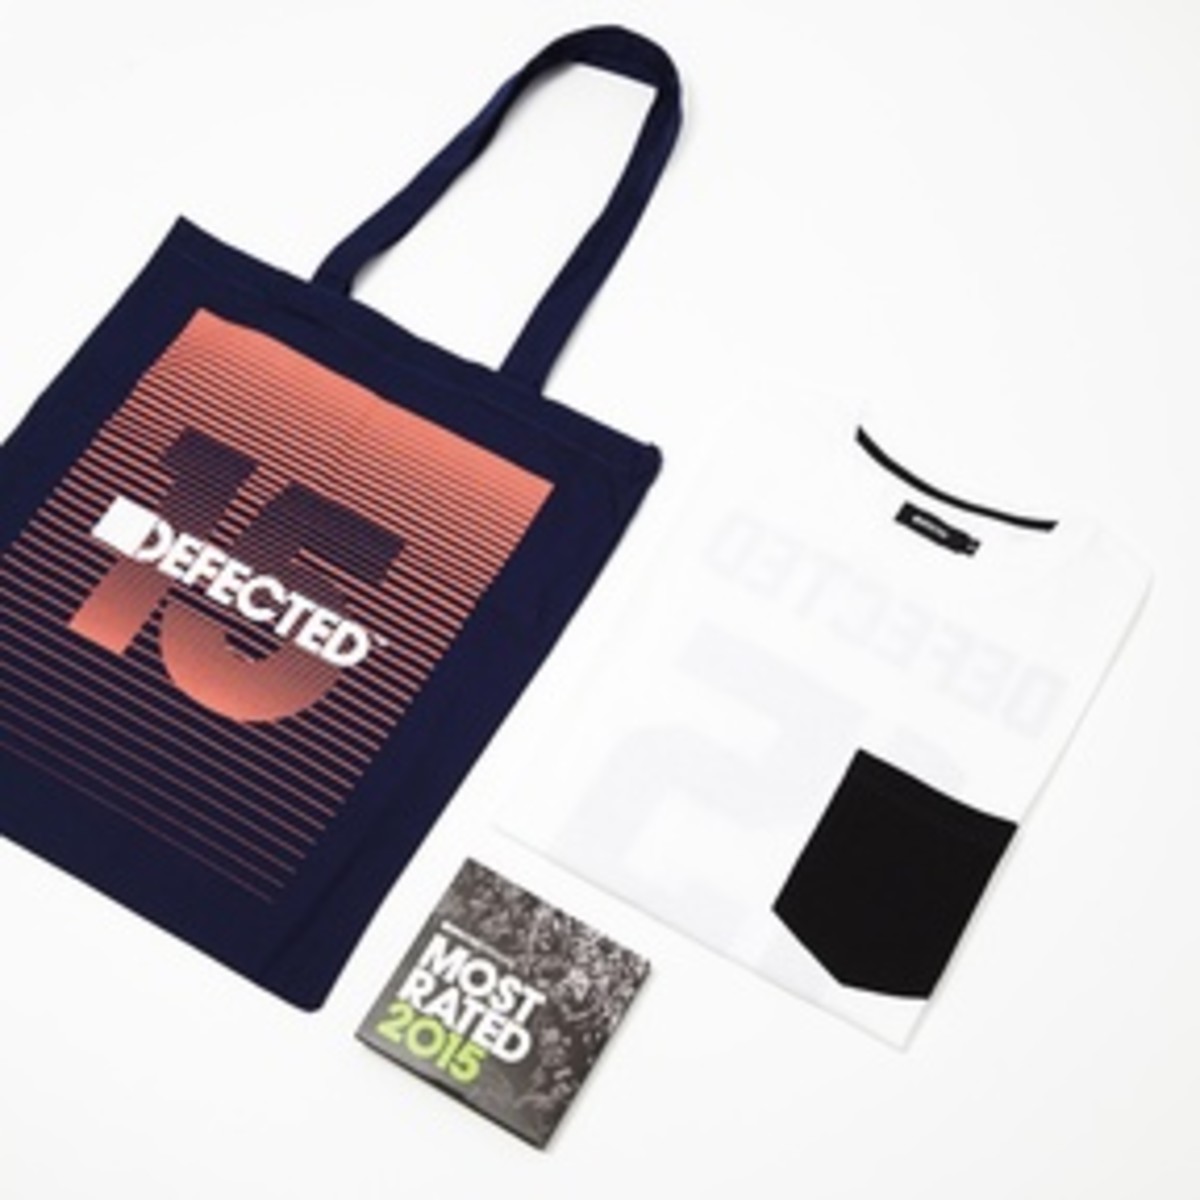 Defected Records Holiday Gift Guide